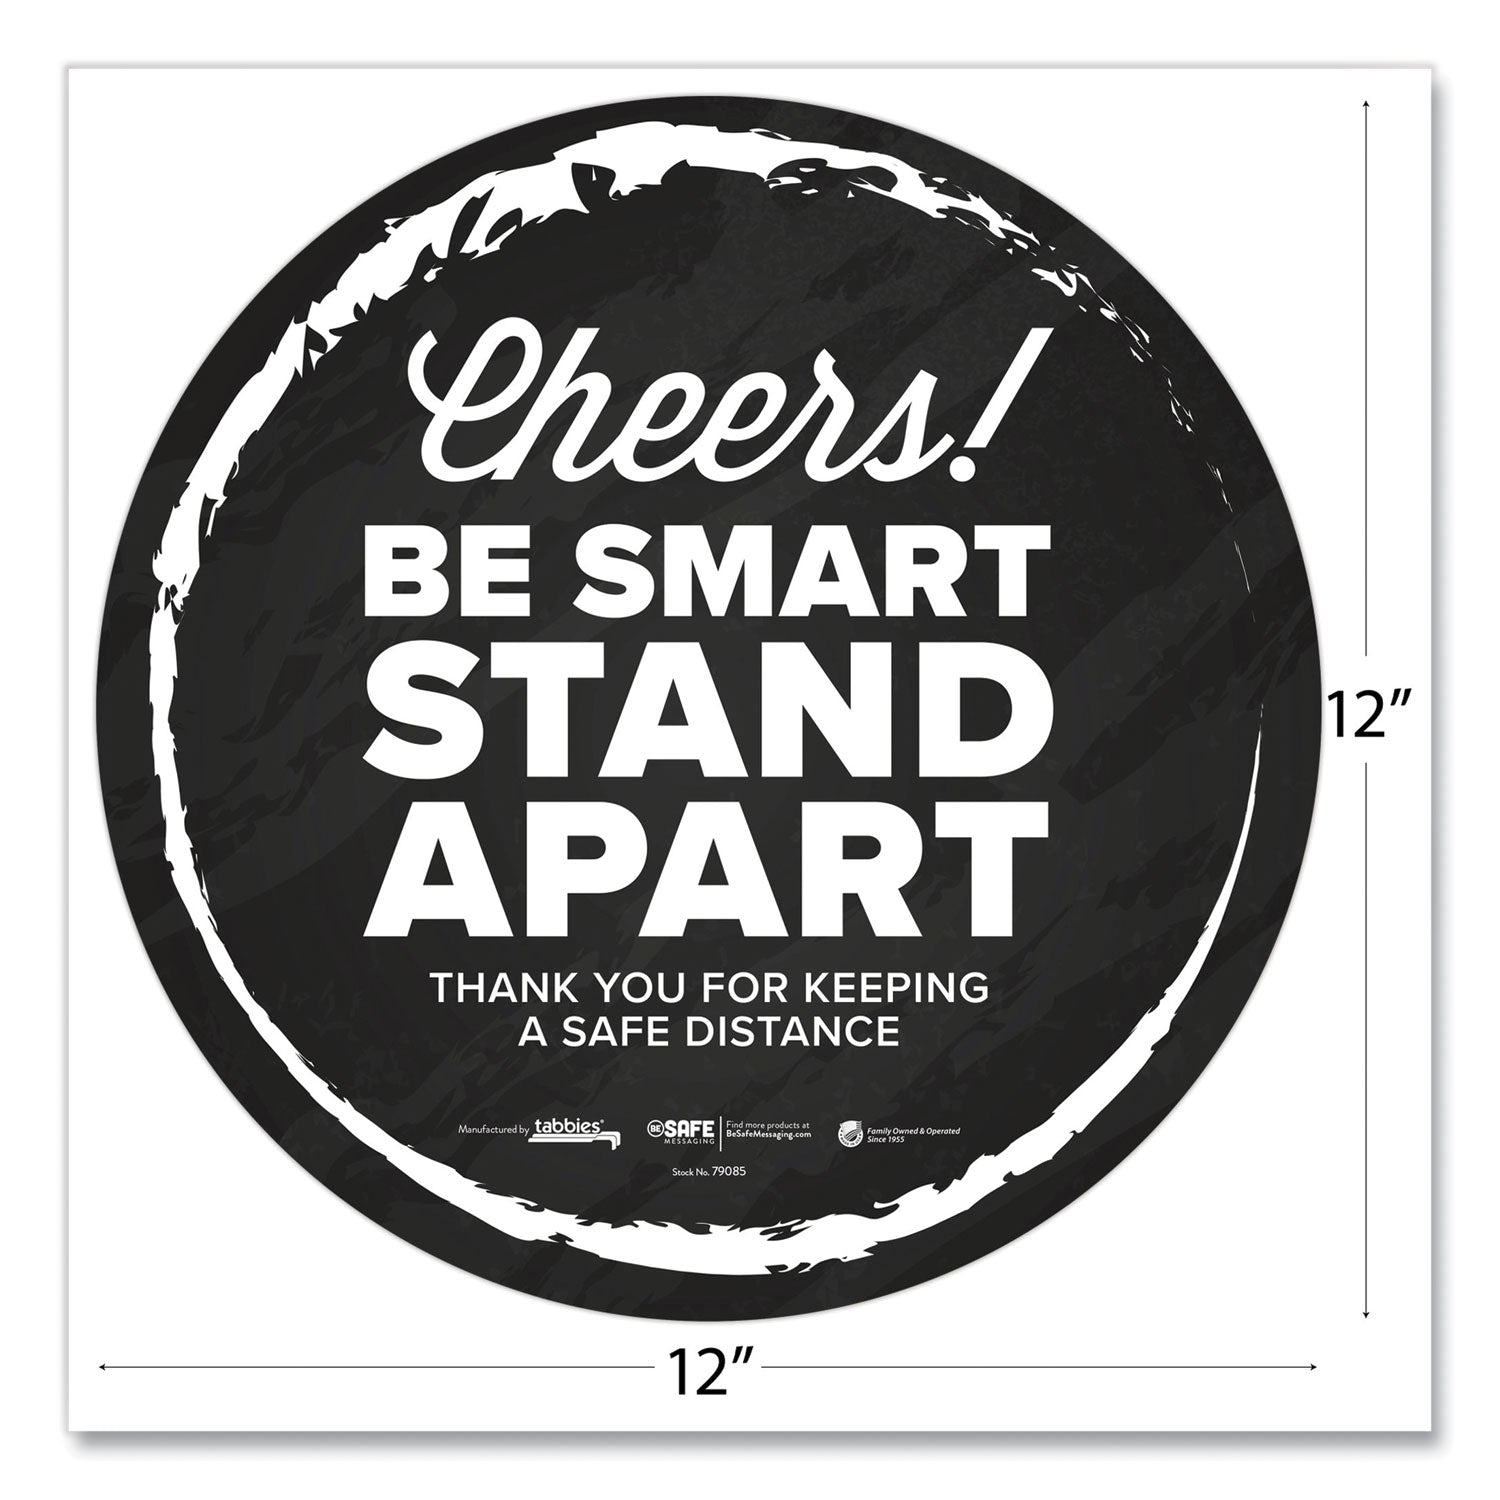 besafe-messaging-floor-decals-cheers;be-smart-stand-apart;thank-you-for-keeping-a-safe-distance-12-dia-black-white-60-ct_tab79185 - 2